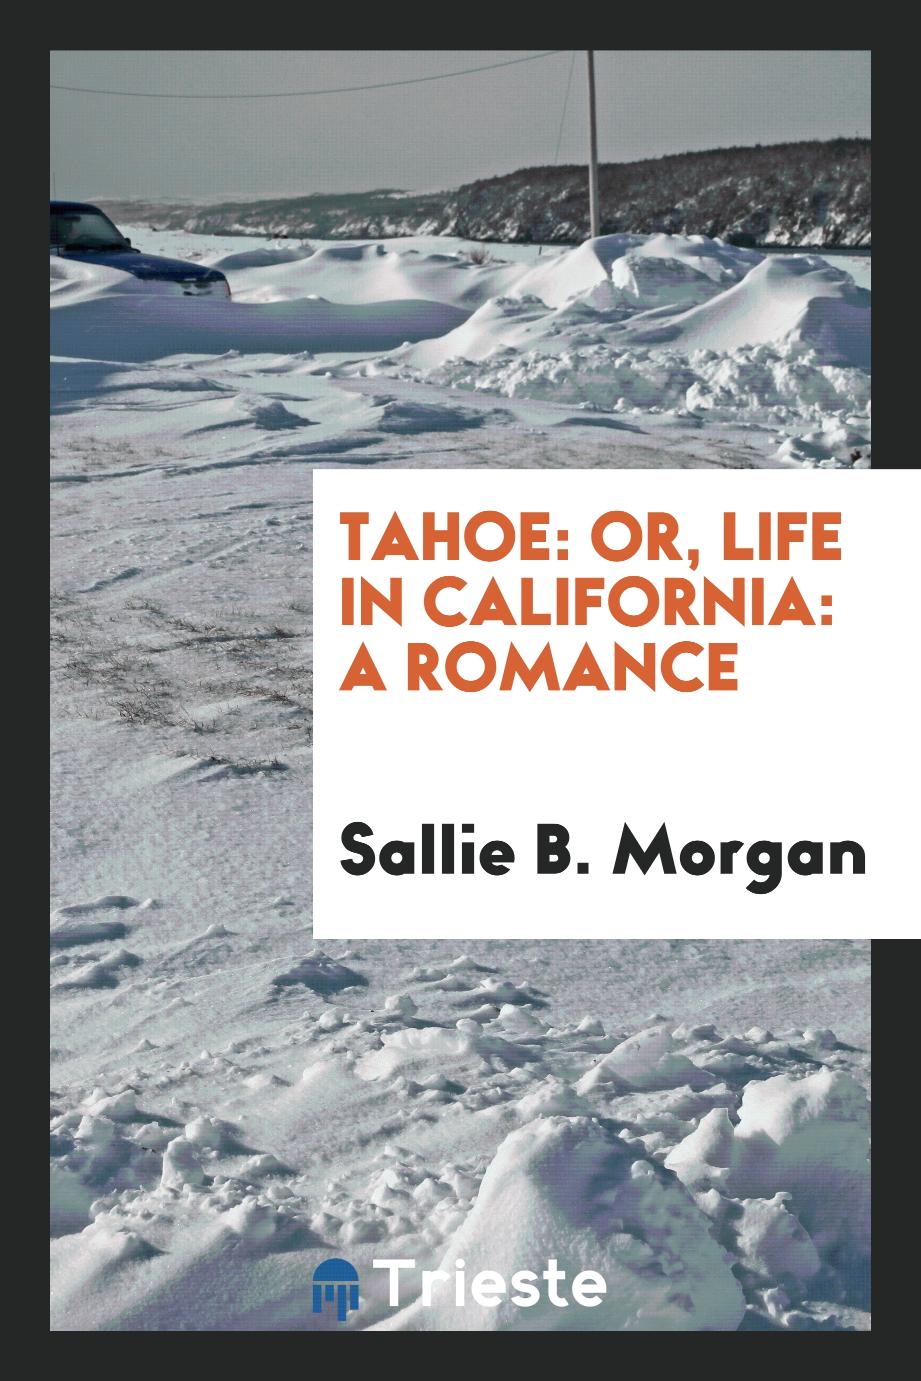 Tahoe: or, Life in California: a romance